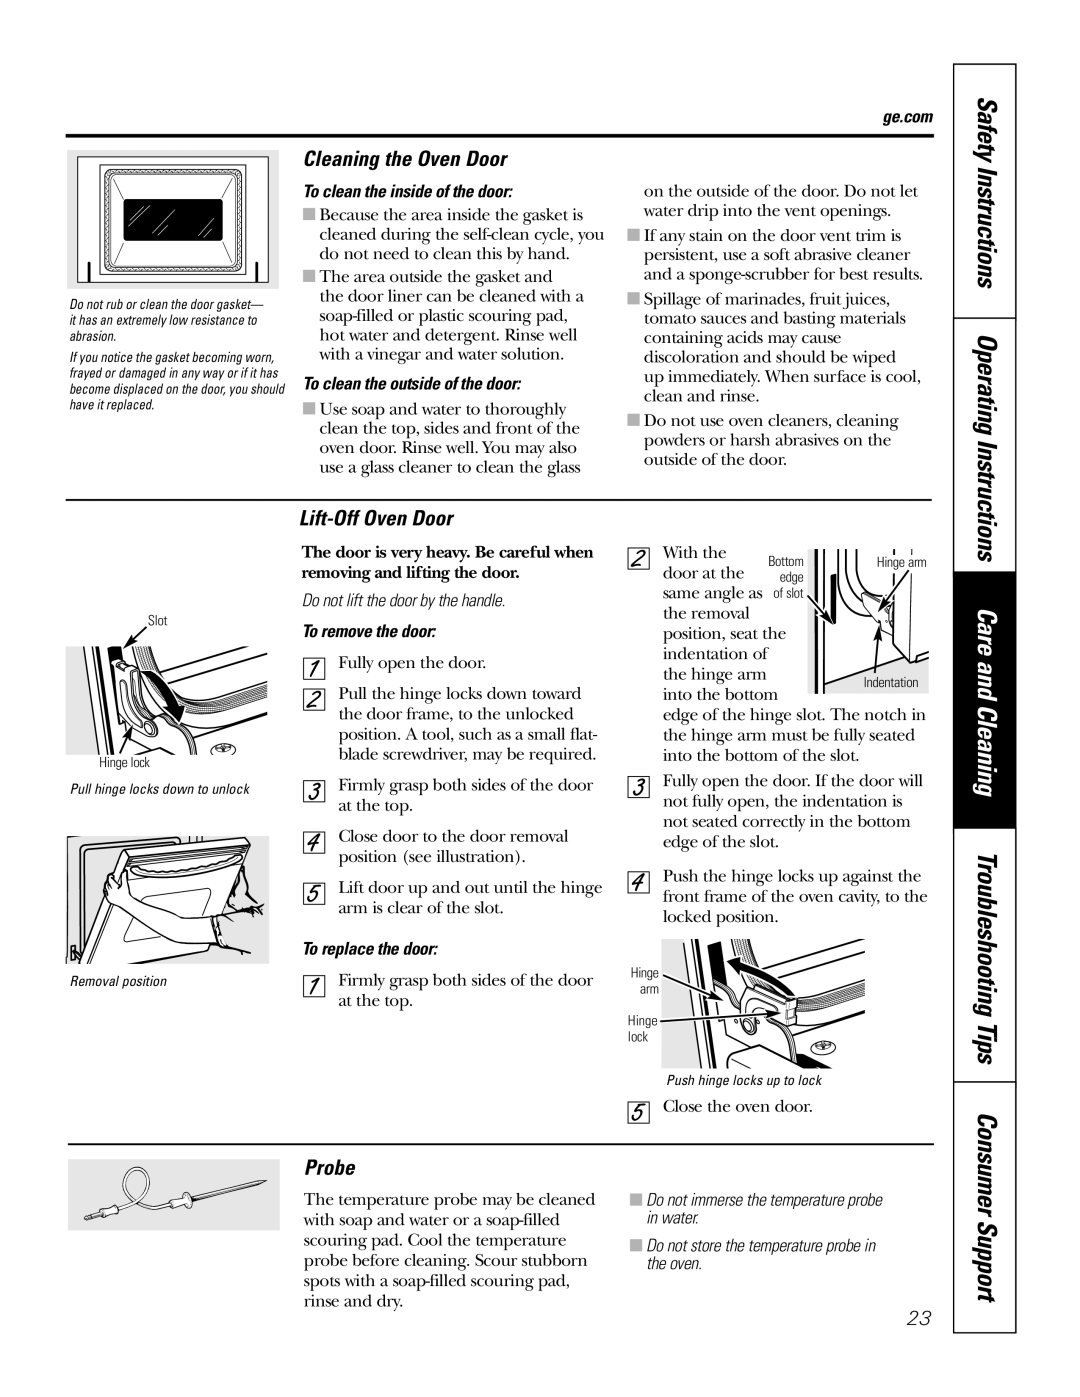 GE PK916 owner manual Cleaning the Oven Door, Lift-OffOven Door, Probe, Instructions Operating Instructions 